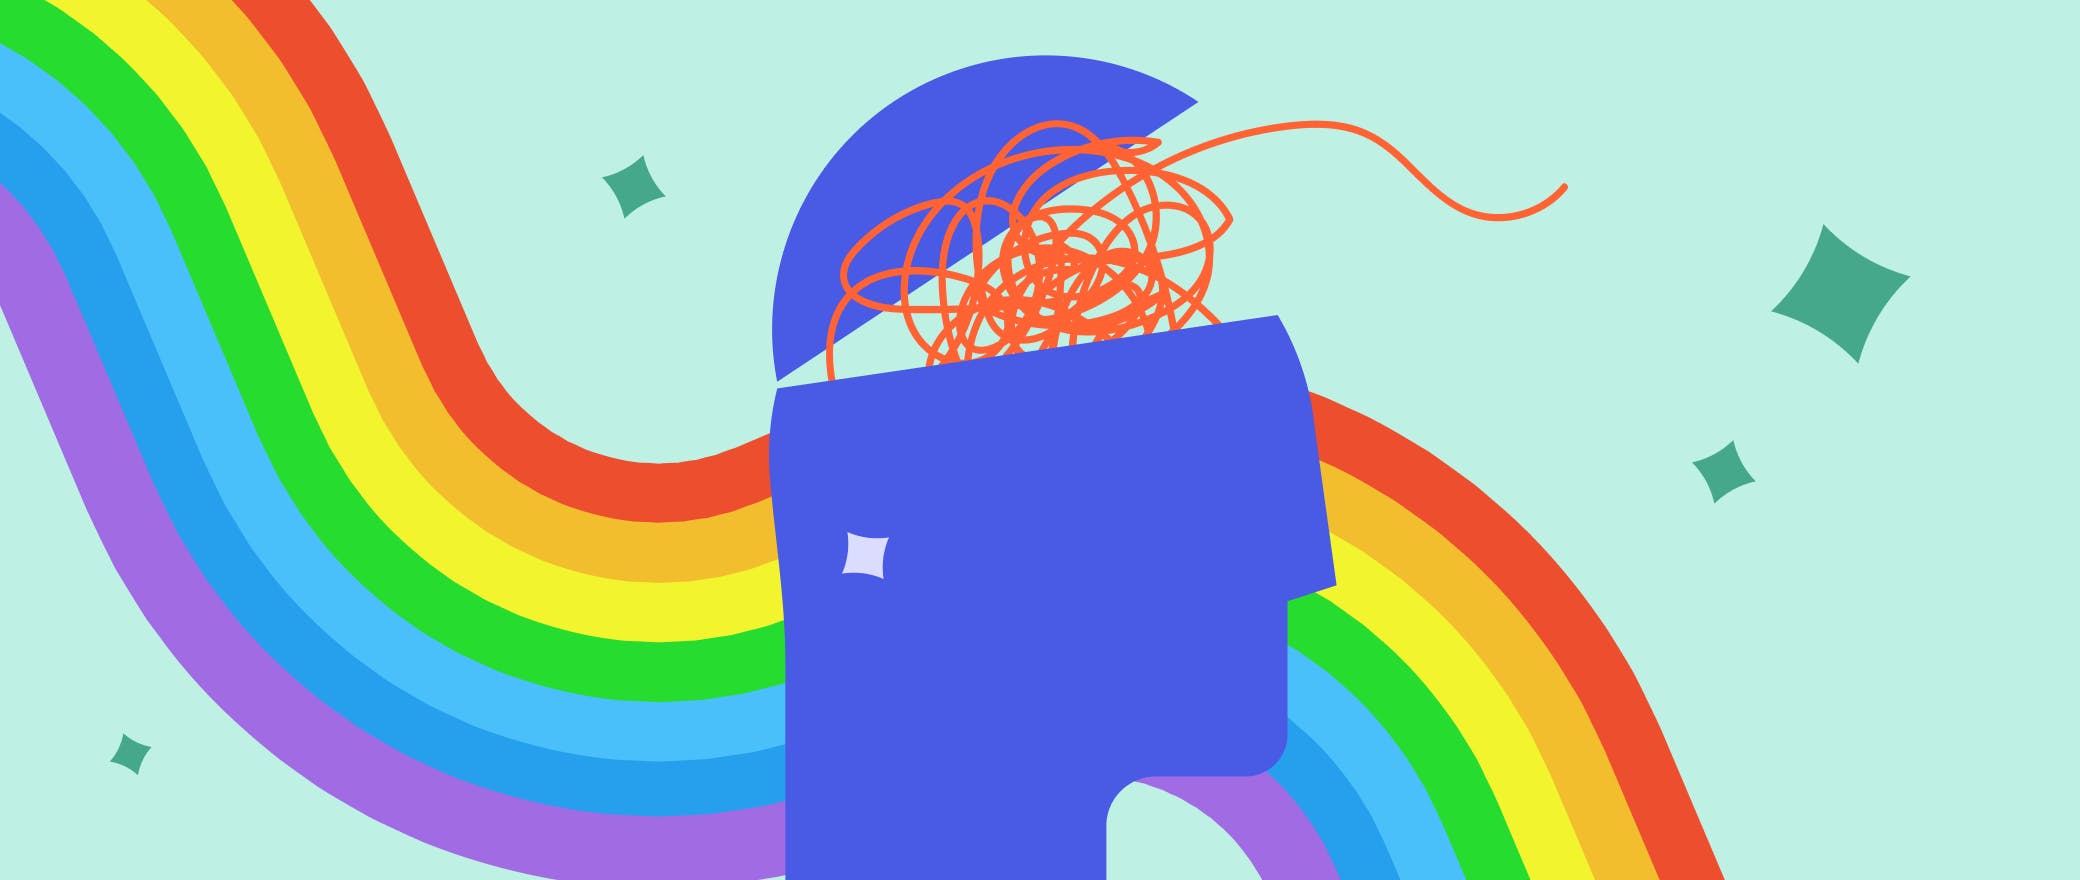 The silhouette of a human head with messy lines scribbled around the top to depict a mind full of scrambled thoughts against a background of pride colours.
